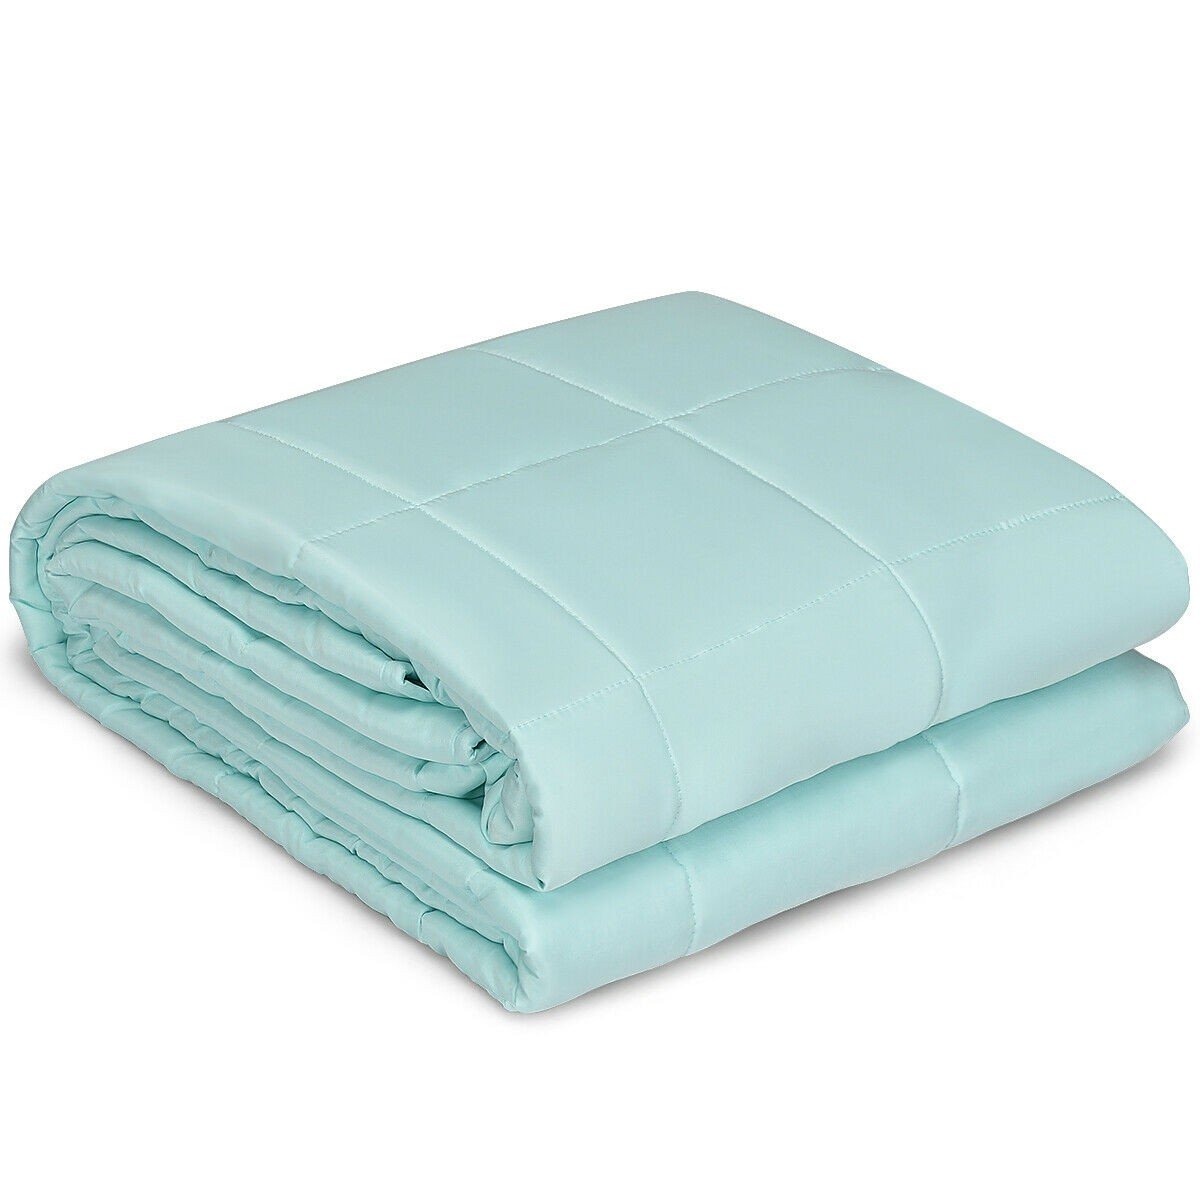 Luxury Cooling Silk Sewed in Cotton Pink, Blue, Green, 48" x 72"  60" x 80" | 15lbs